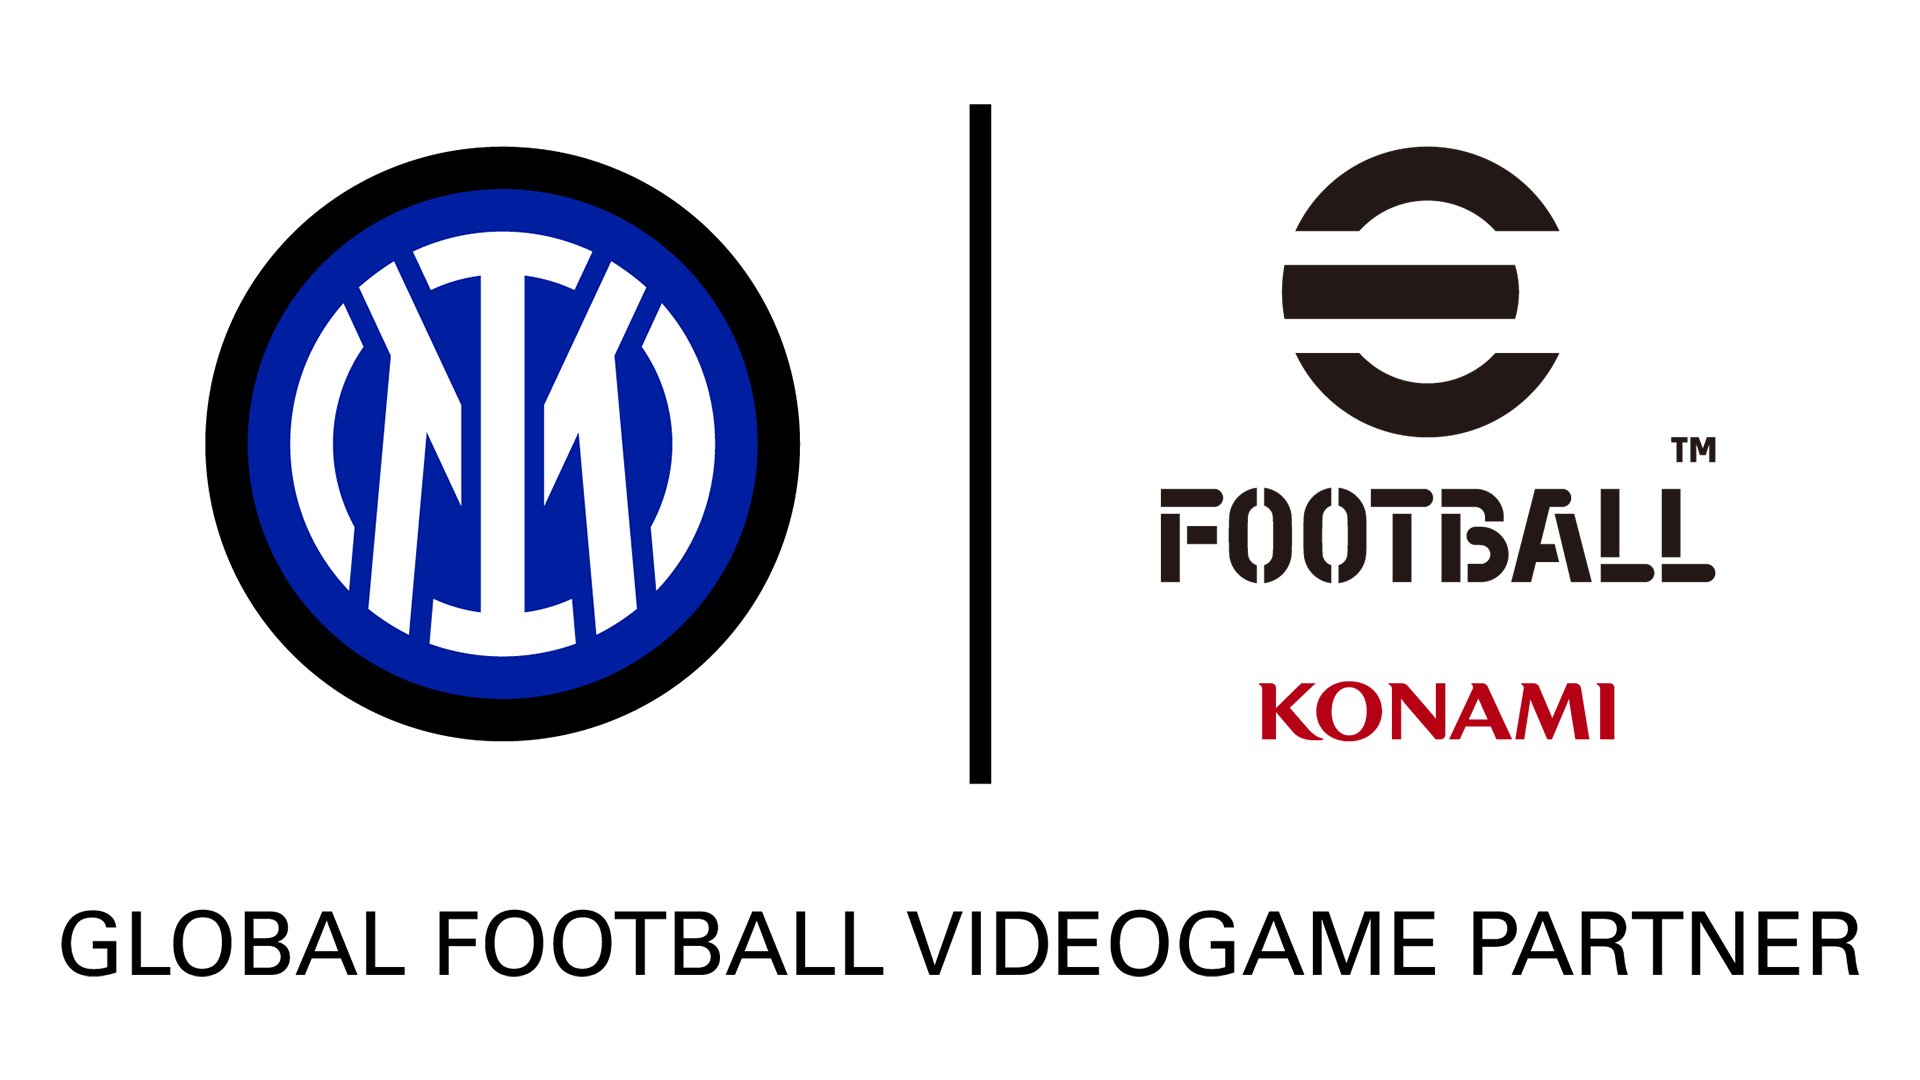 eFootball on Twitter: "We are pleased to announce a new long-term  partnership between KONAMI and Italian giants @Inter! 🤝  https://t.co/VgT88X6Im8" / Twitter